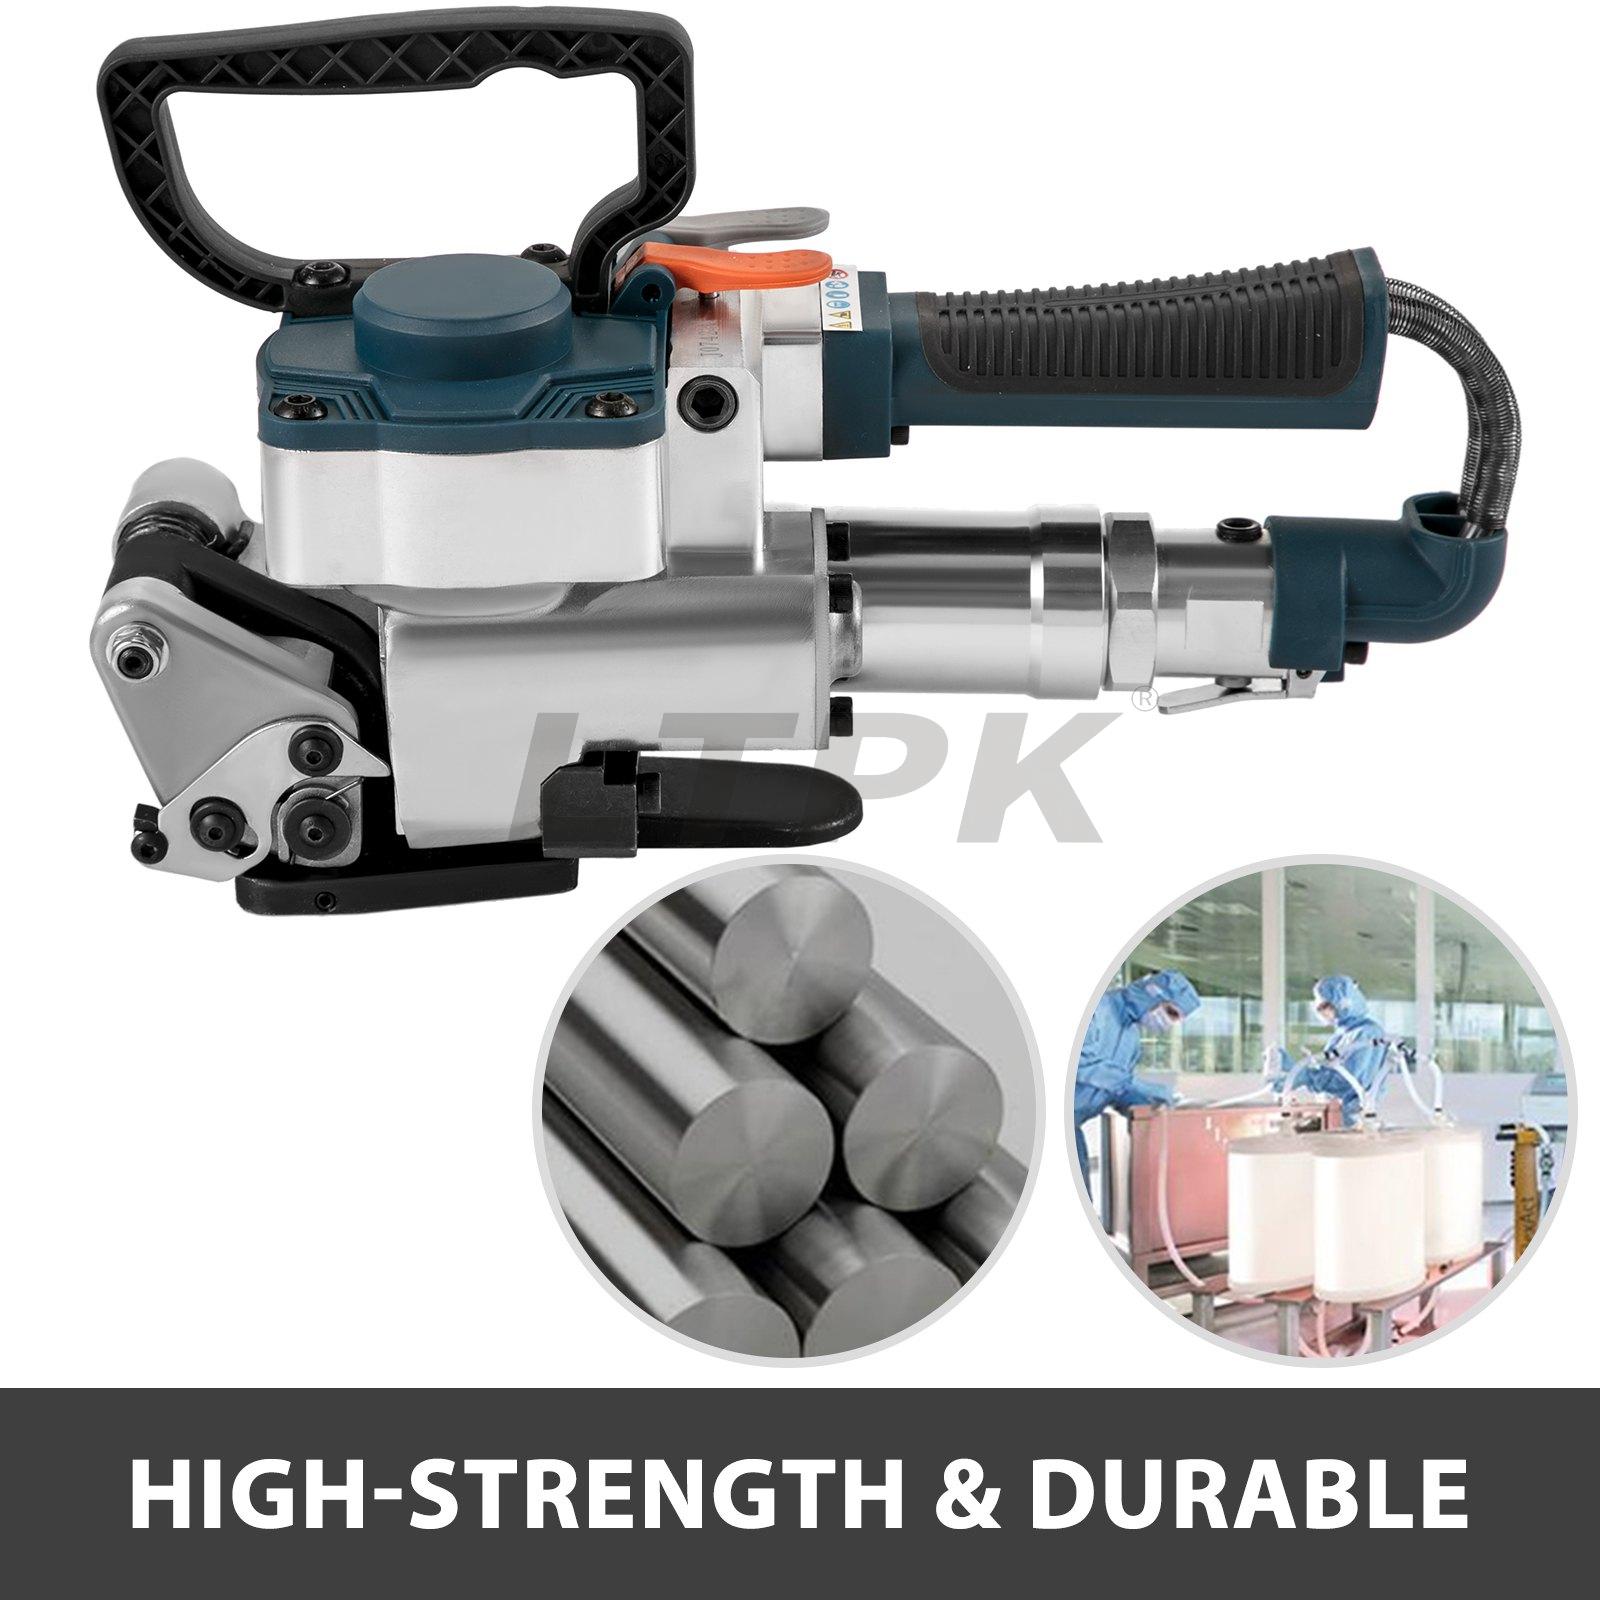 LTPK B19 Handheld pneumatic Strapping Machine with 3500N Max Tension.jpg